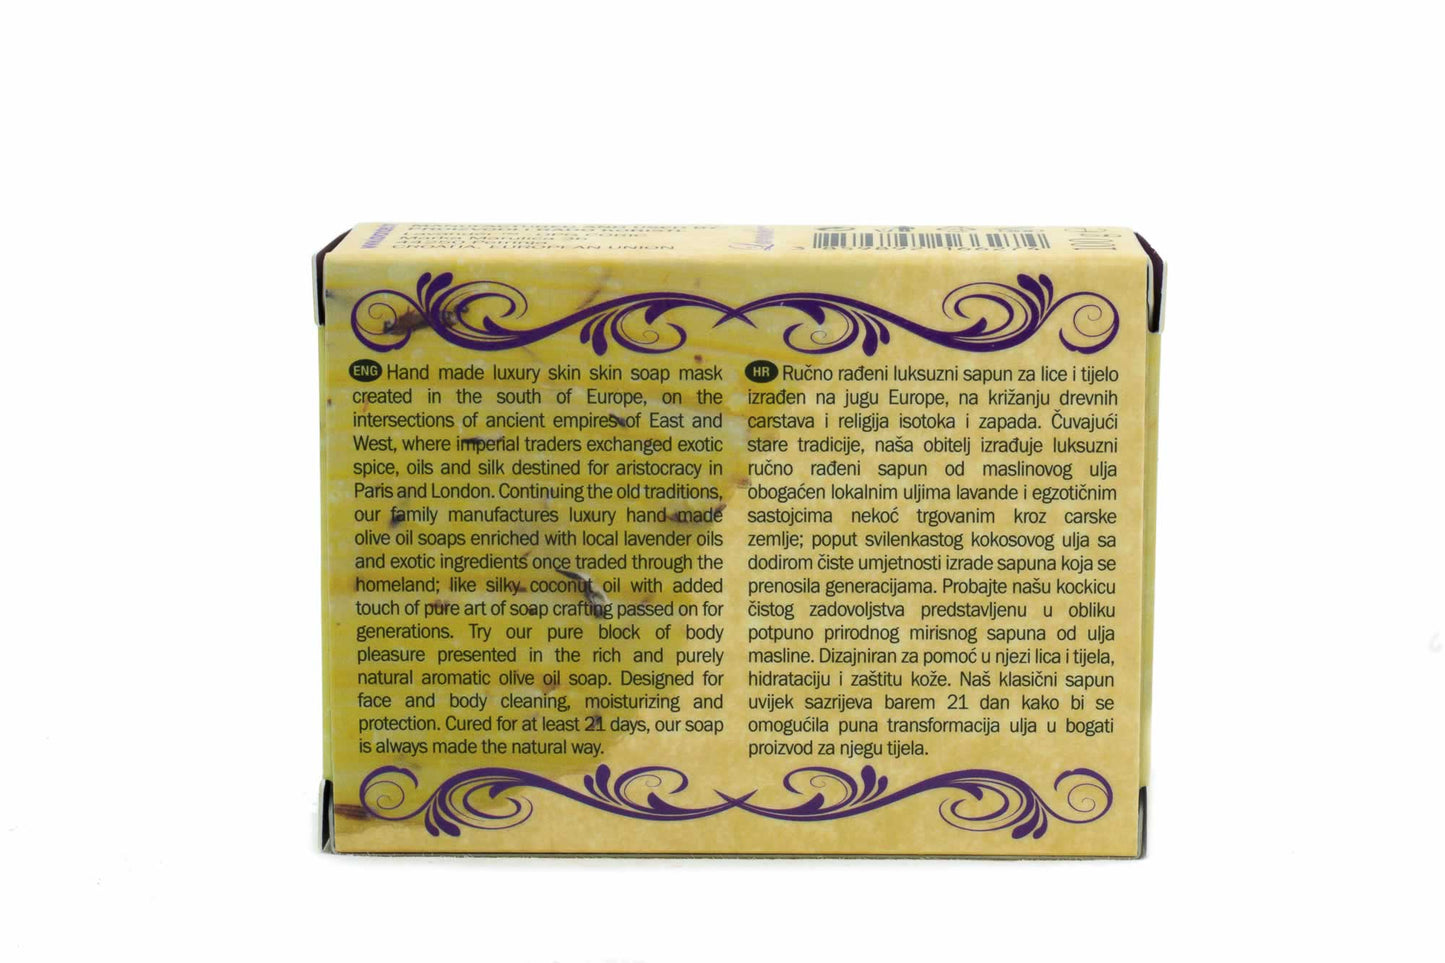 Soap with lavender Illyrienne - for moisturizing the face and body